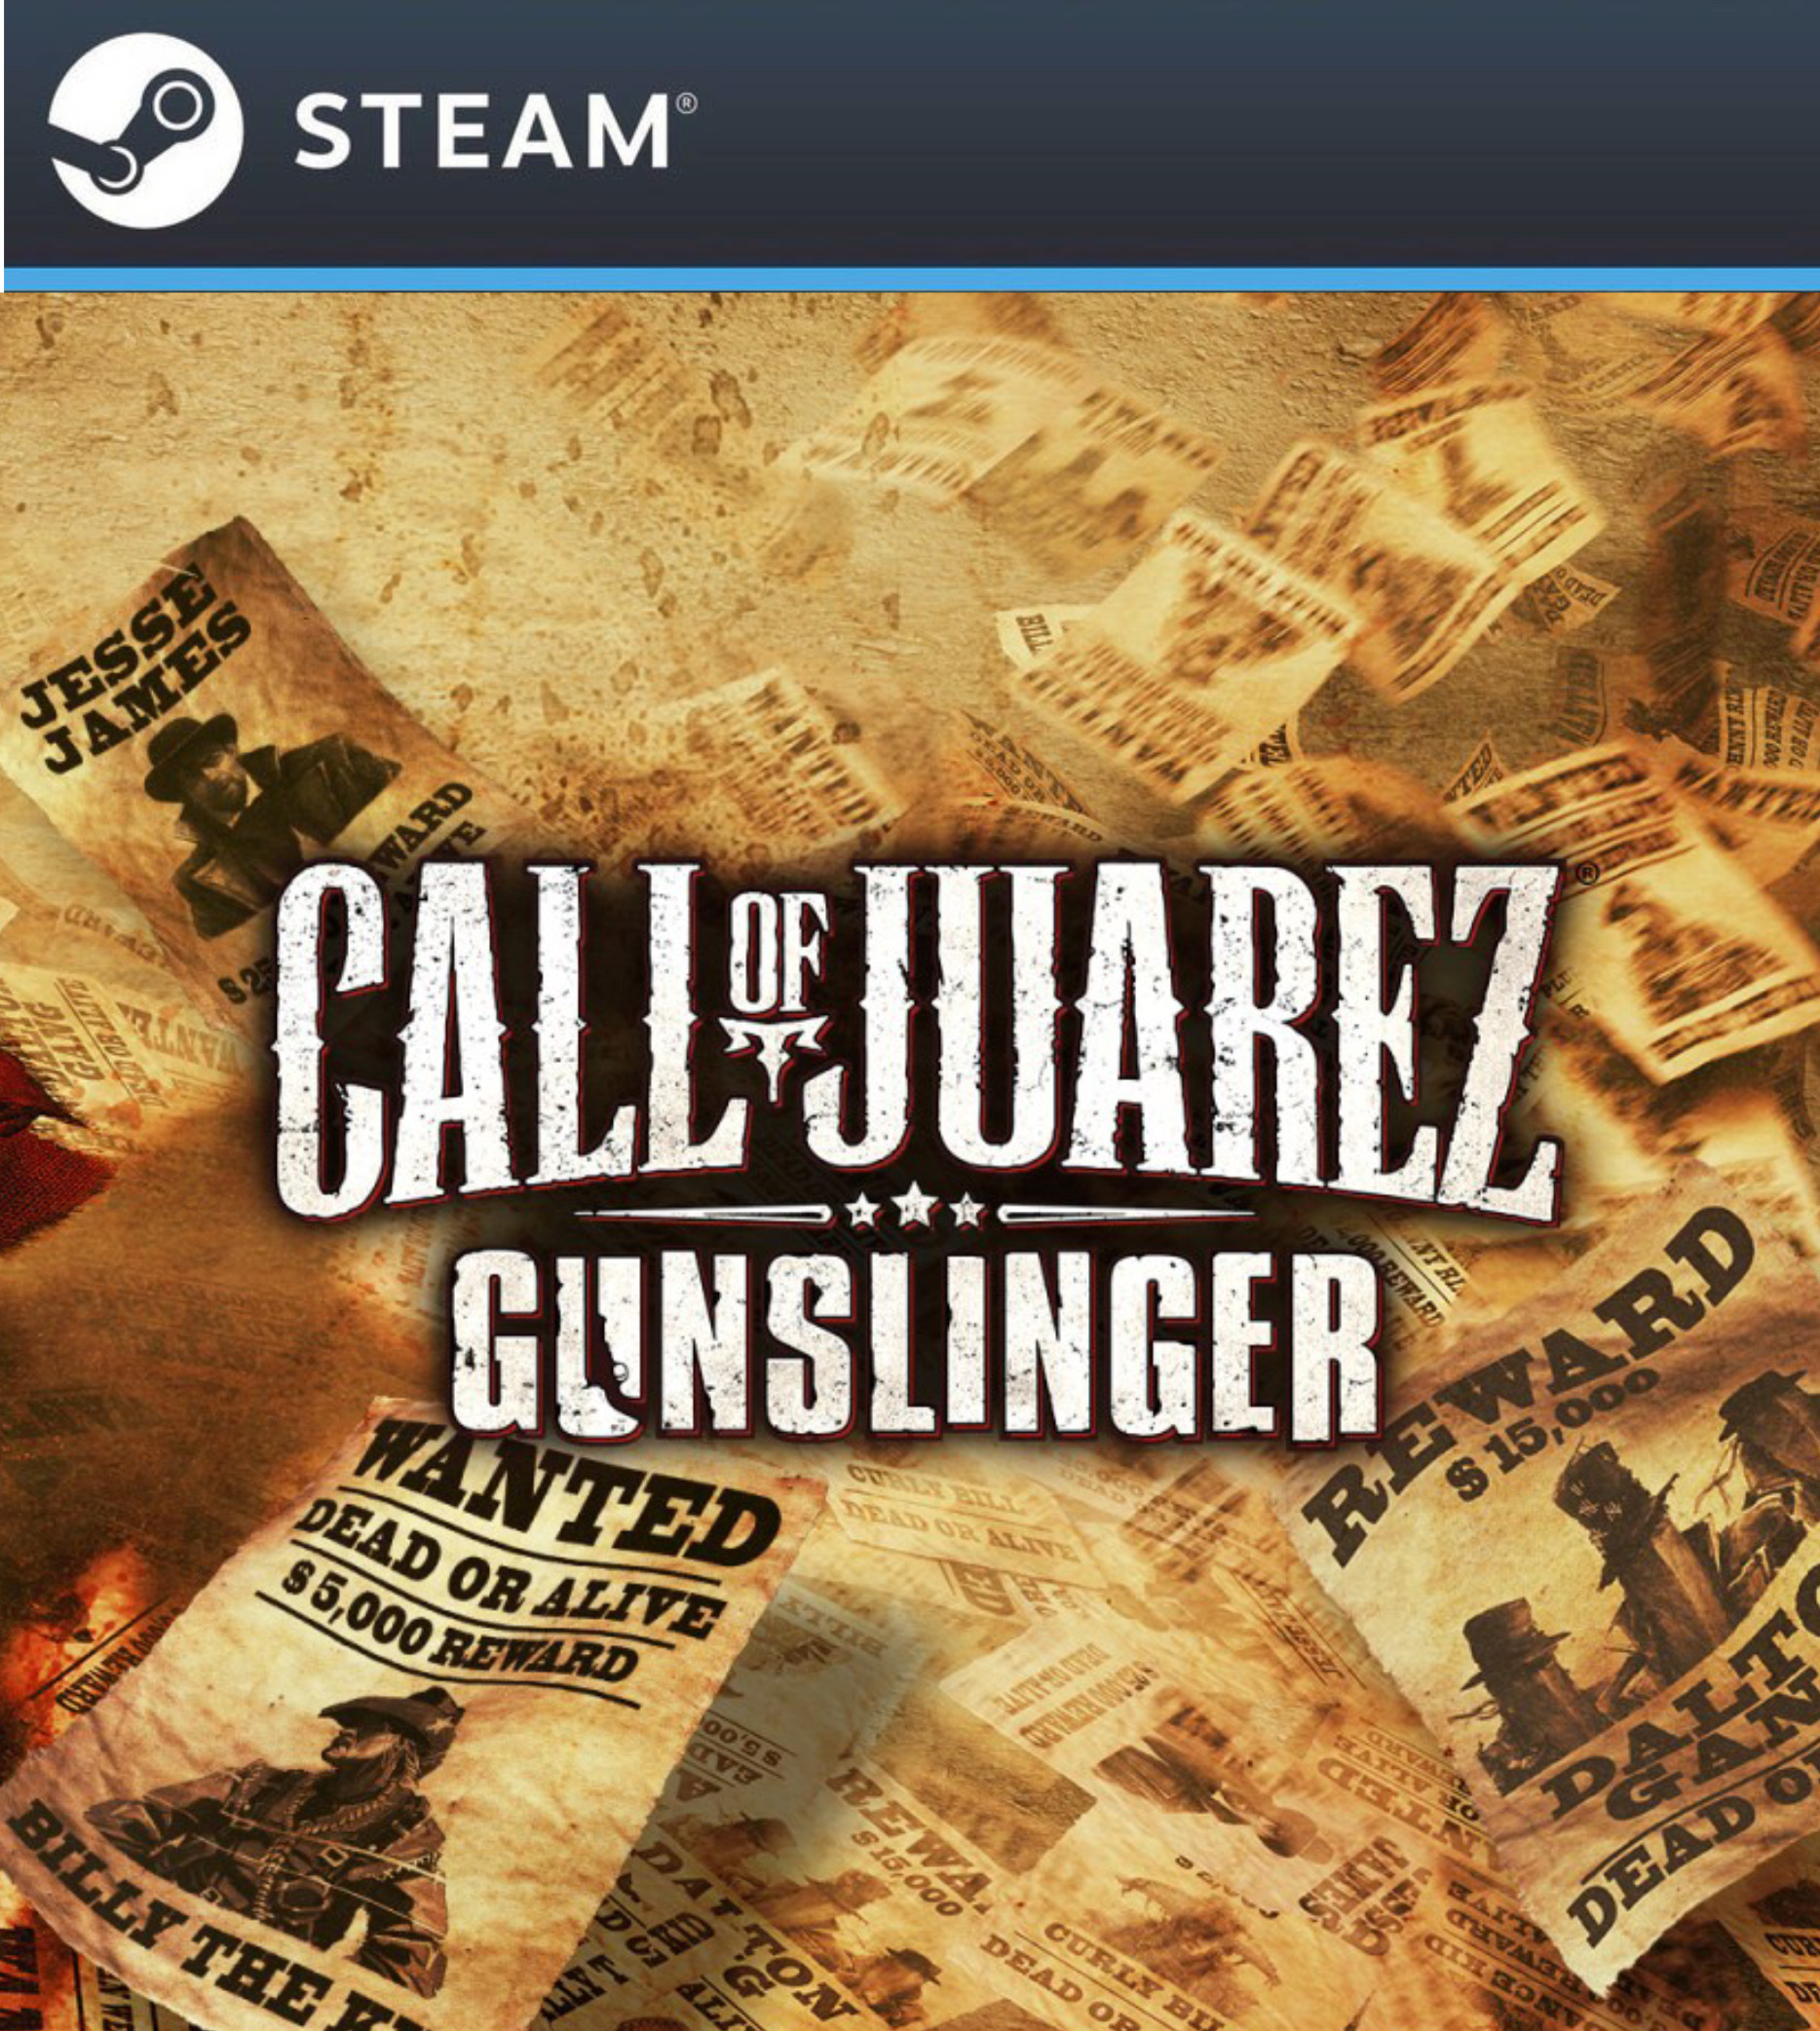 Gunslinger steam is required фото 10